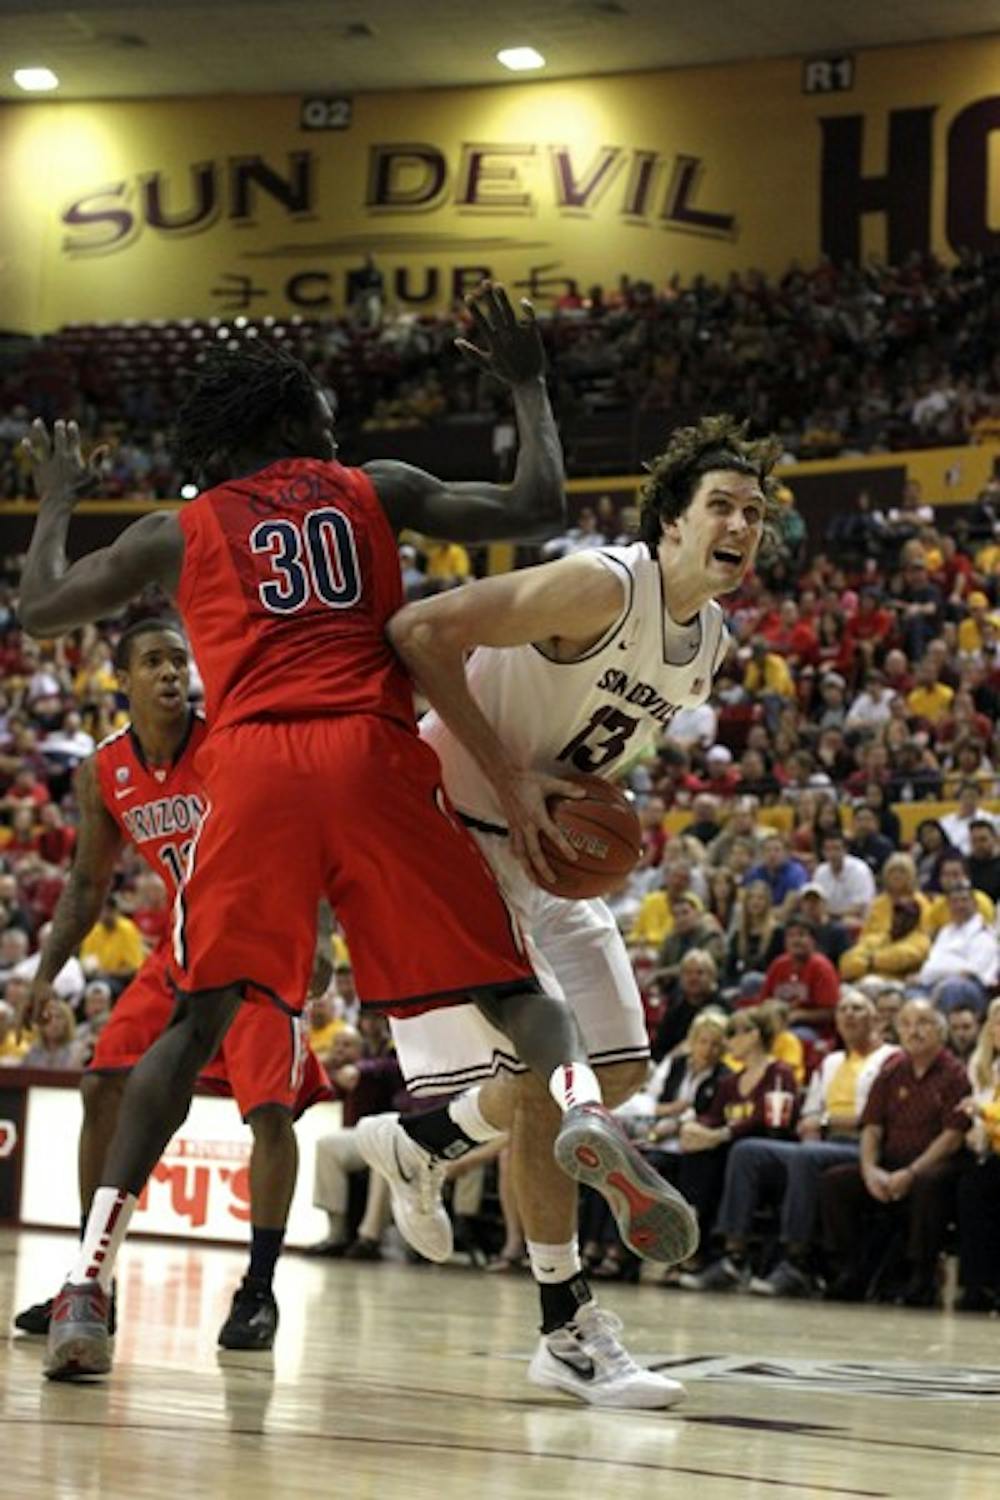 Jordan Bachynski drives around a defender in a game against UA on March 4. Bachynski and the Sun Devils believe they can win the Pac-12 tournament and get into the NCAA tournament. (Photo by Sam Rosenbaum)